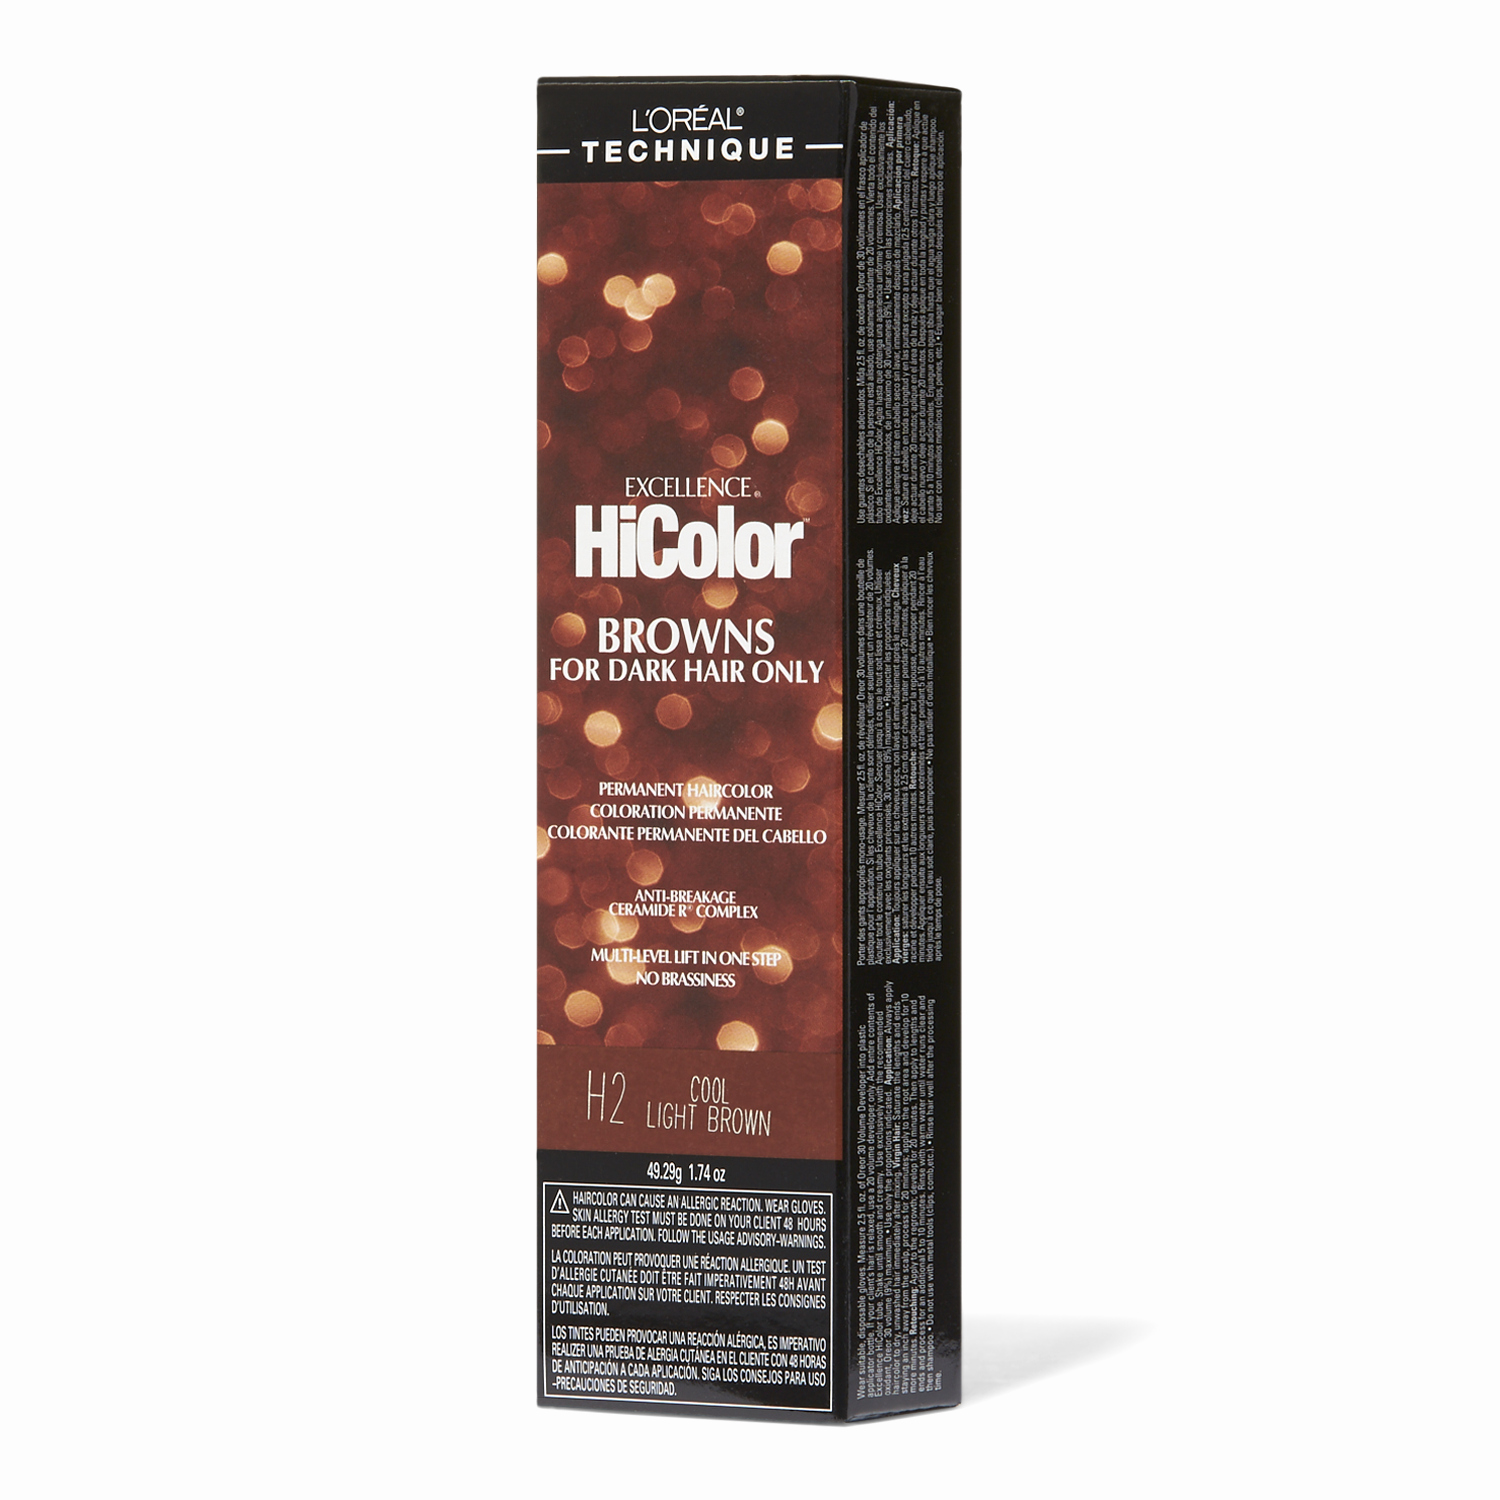 L-oreal Excellence Hicolor Chart Lovely L oreal Excellence Hicolor Permanent Creme Hair Color